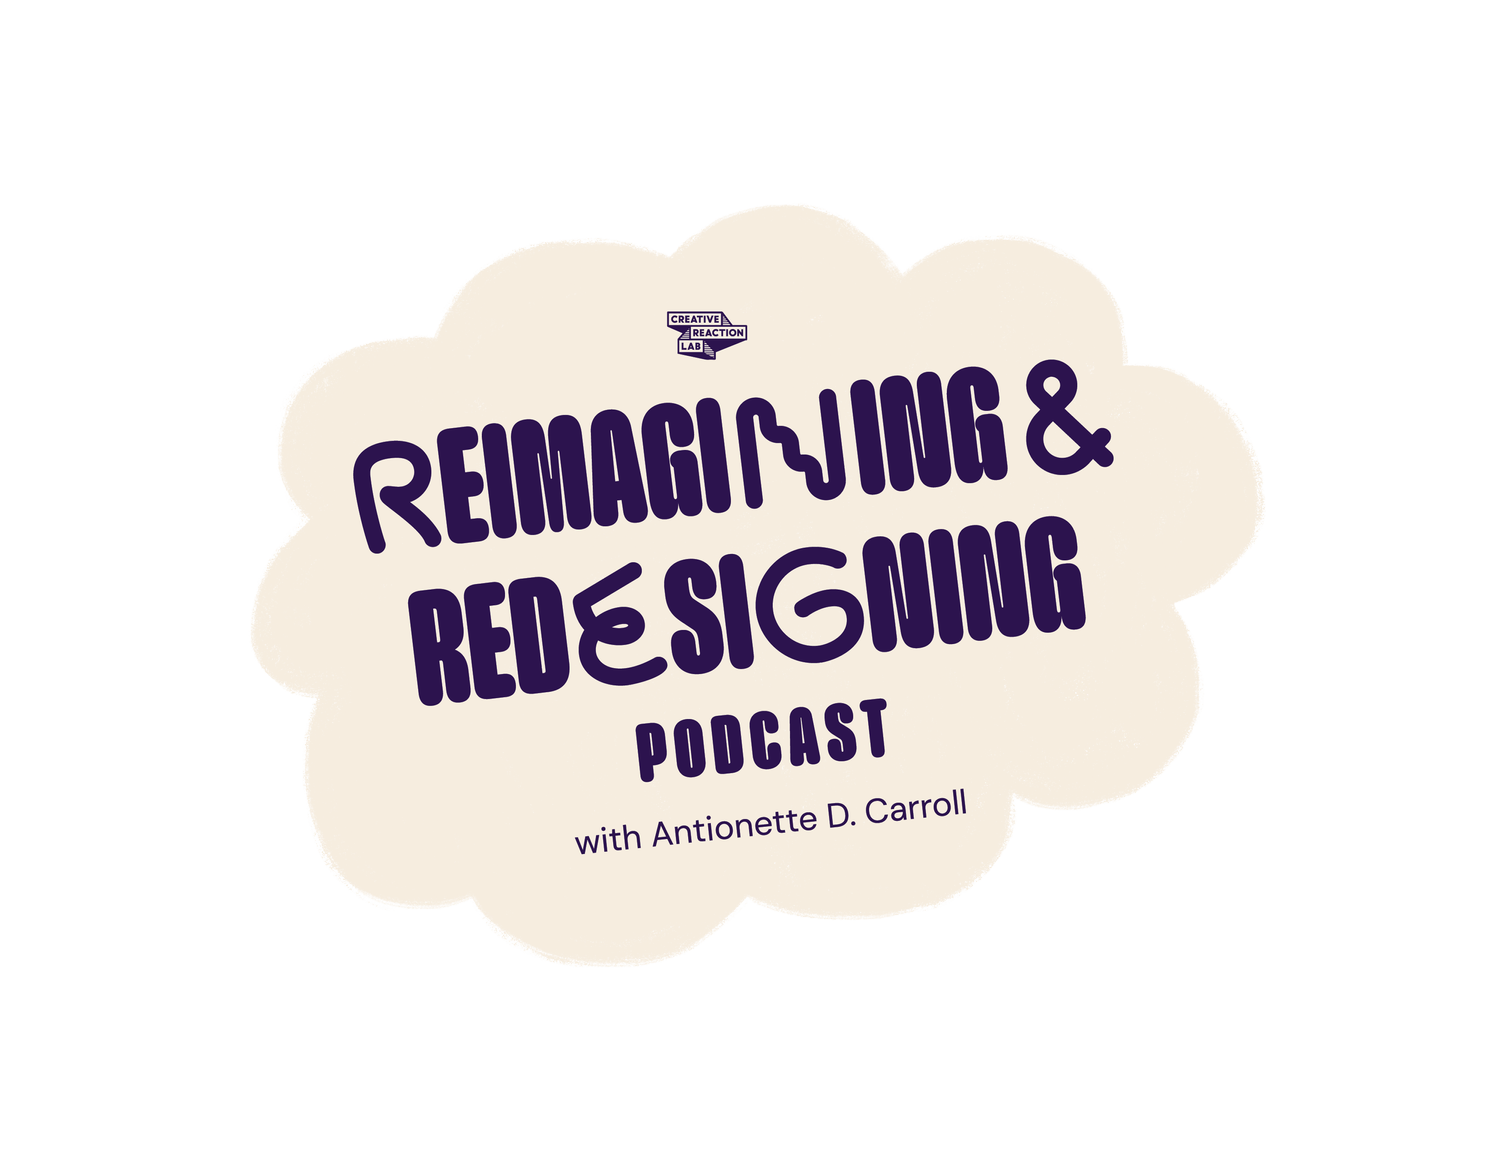 Reimagining &amp; Redesigning with Antionette D. Carroll